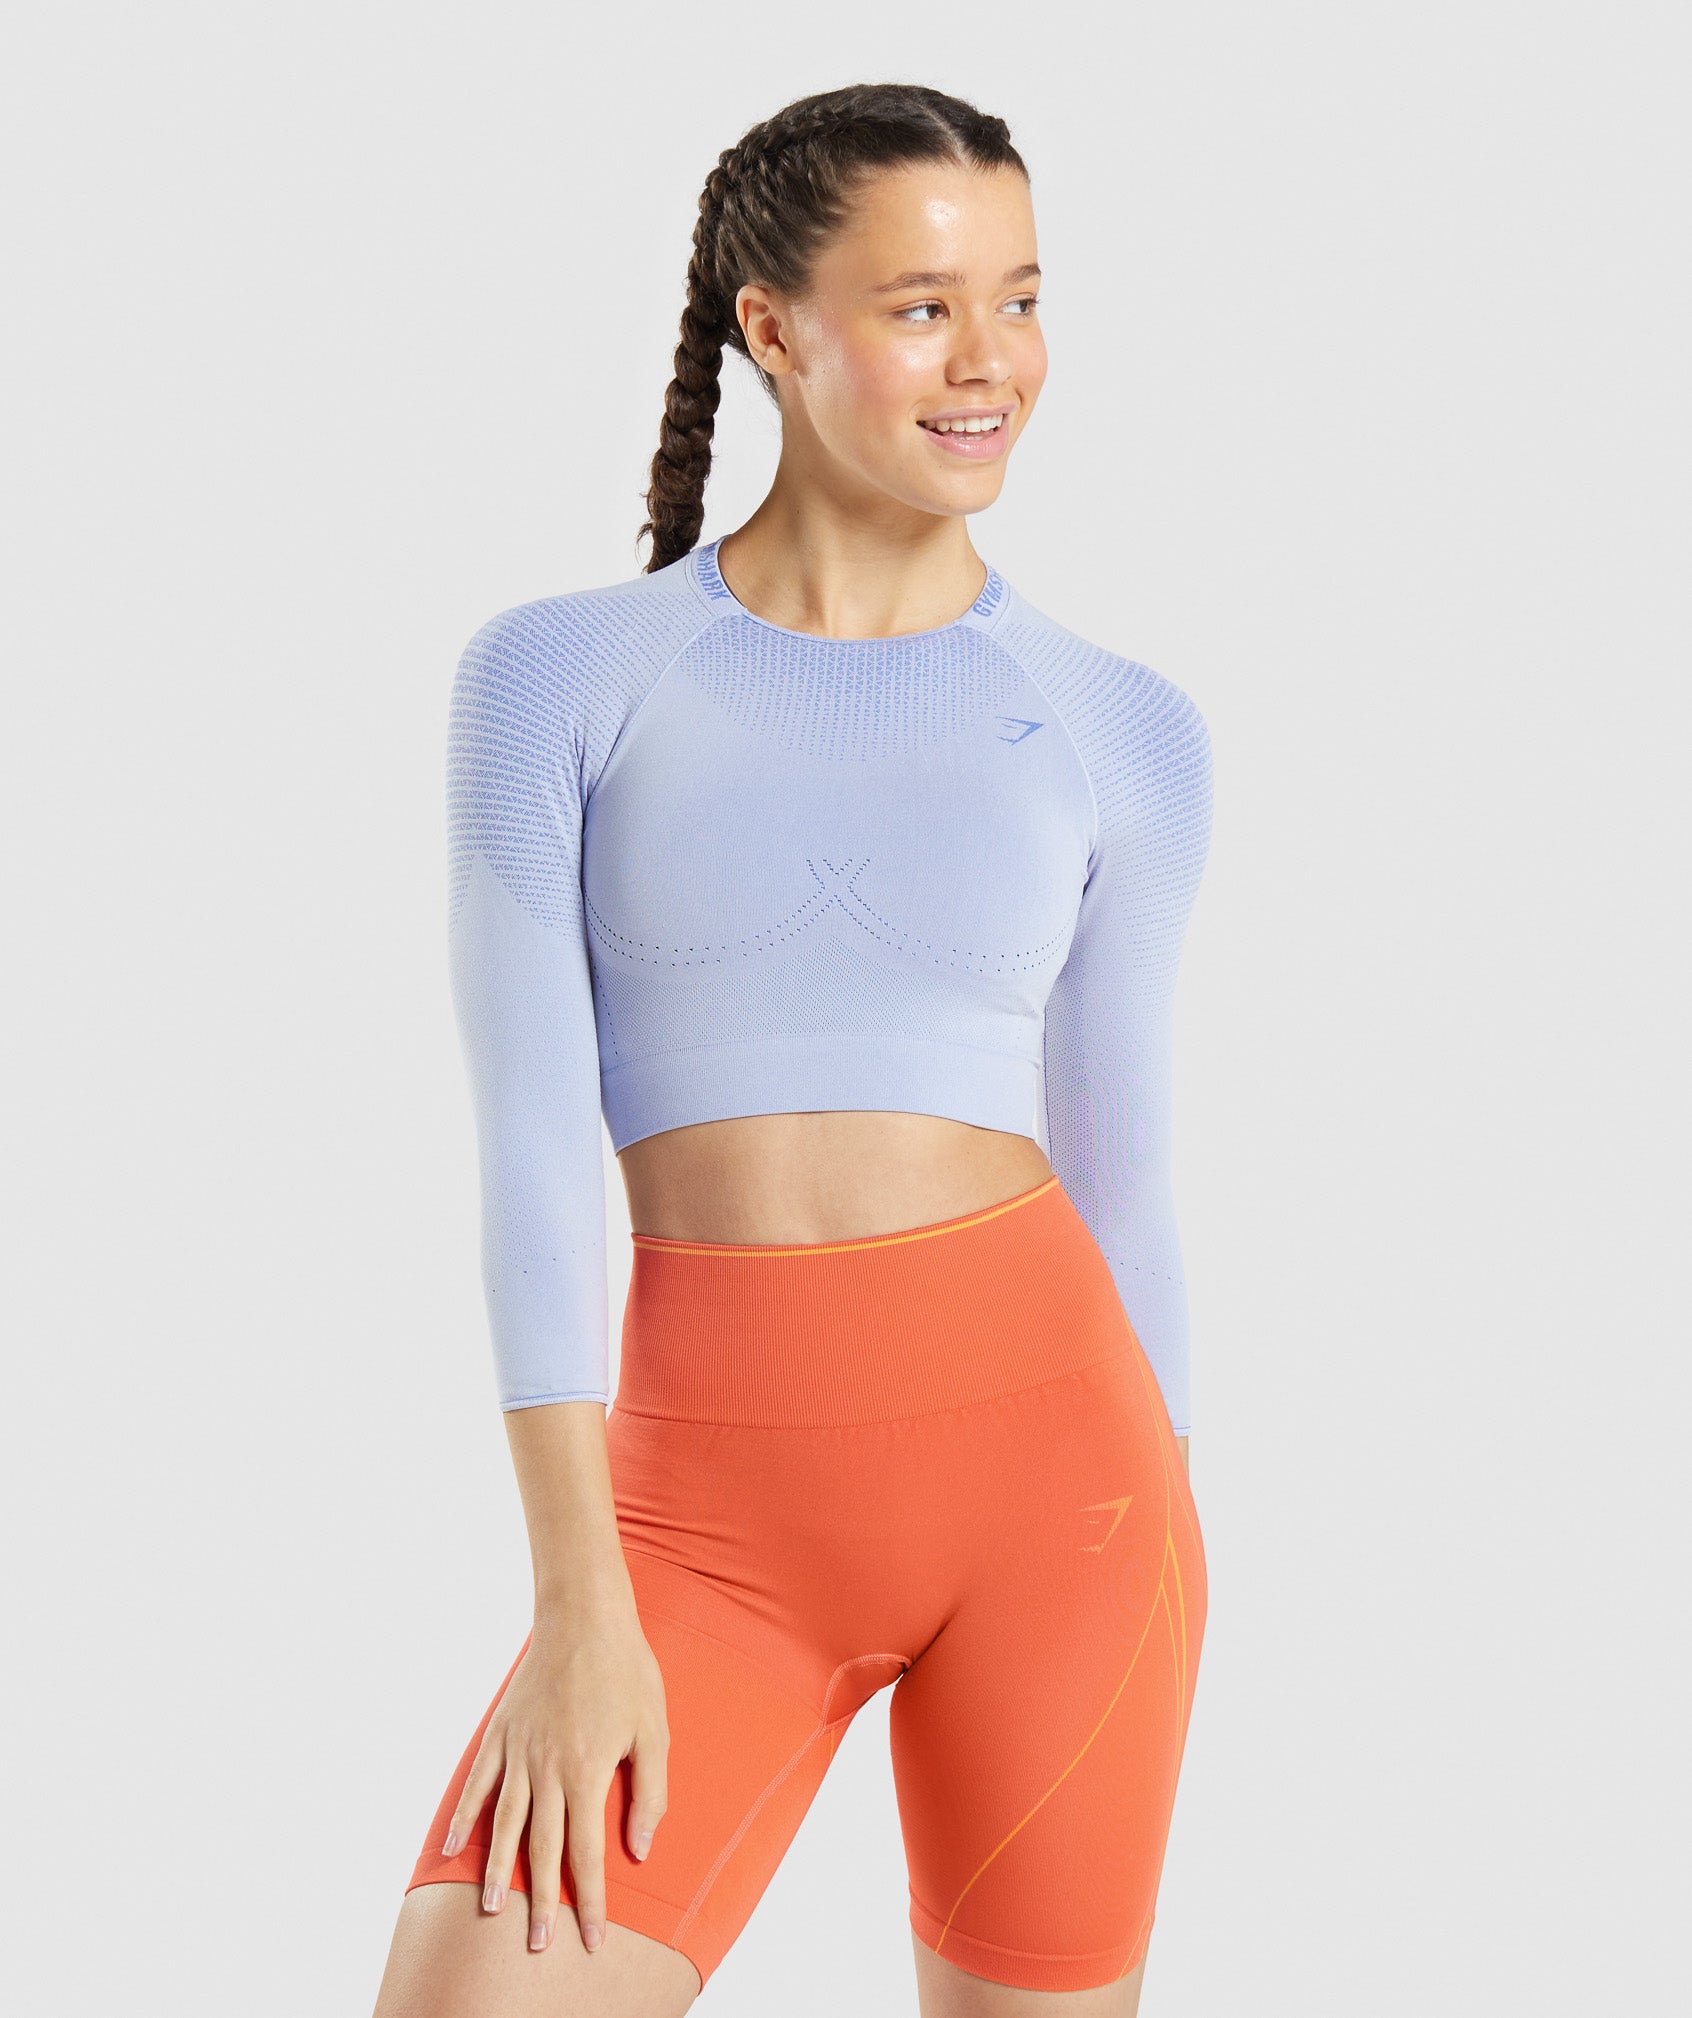 Apex Seamless Crop Top in Lavender Blue/Court Blue - view 1